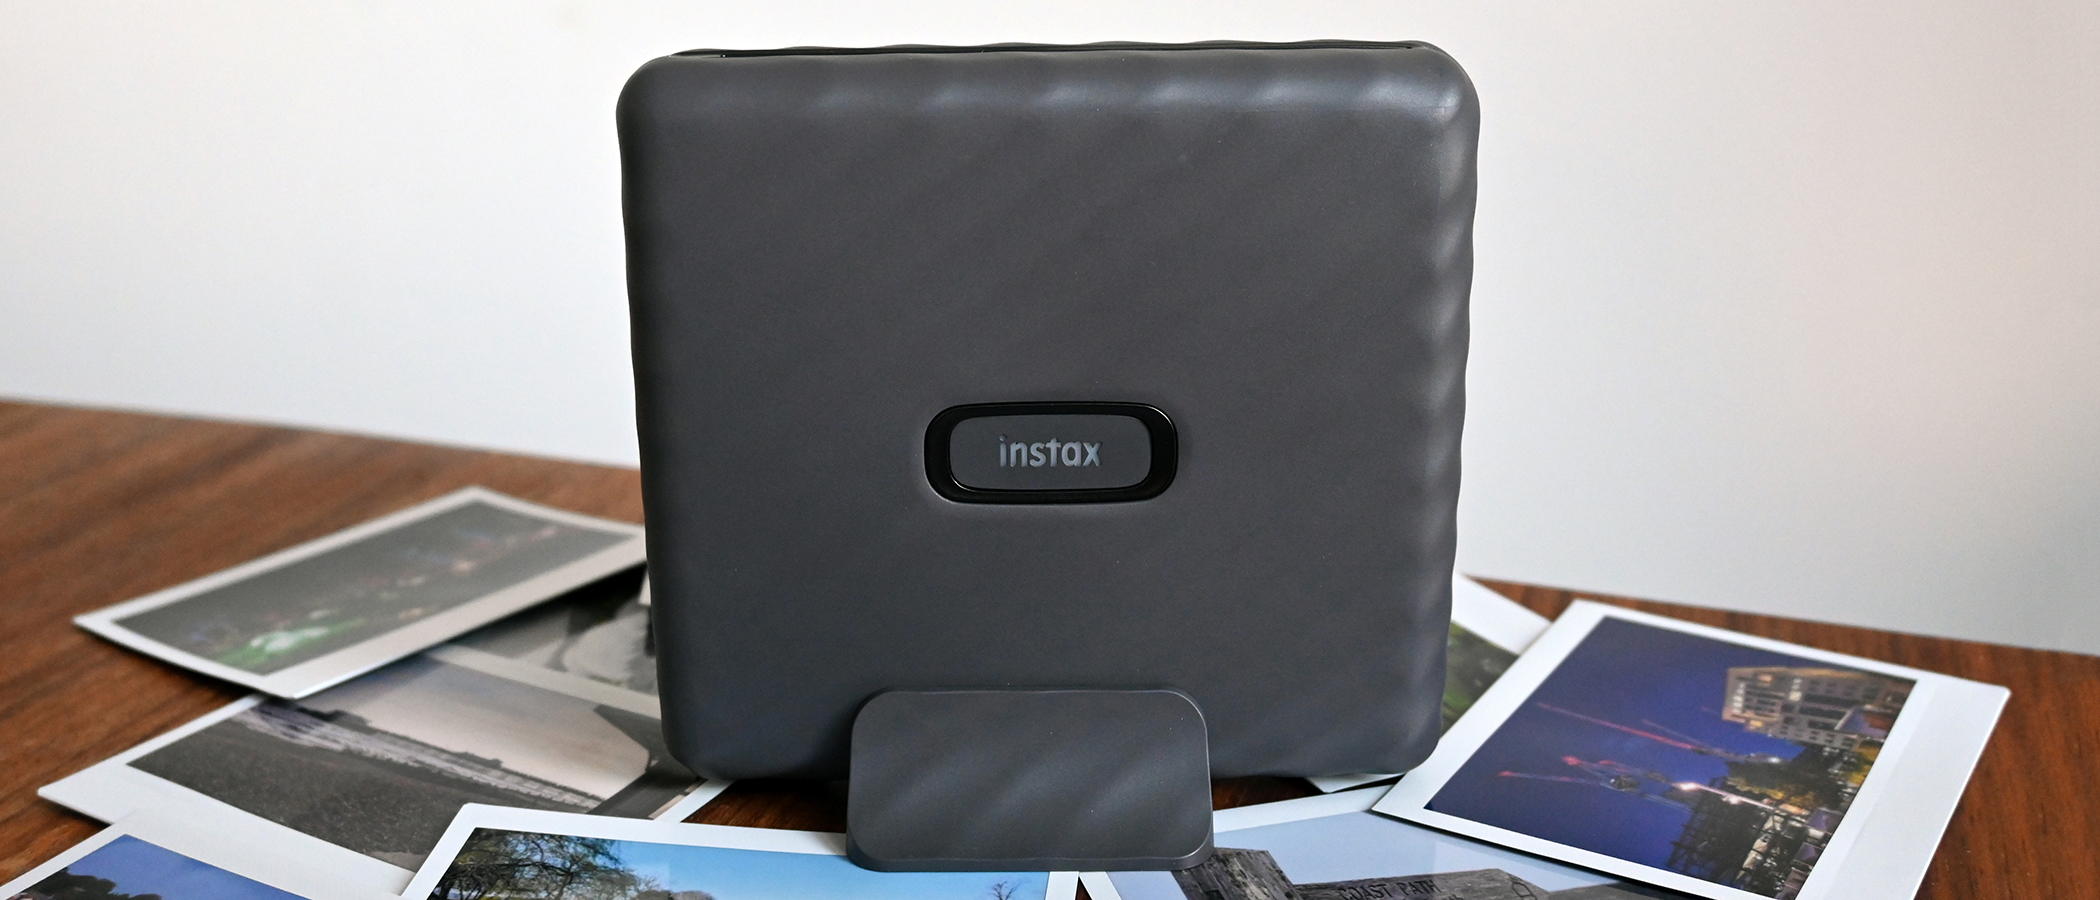 Fuji Instax Link Wide Smartphone Printer: Hands-on Review